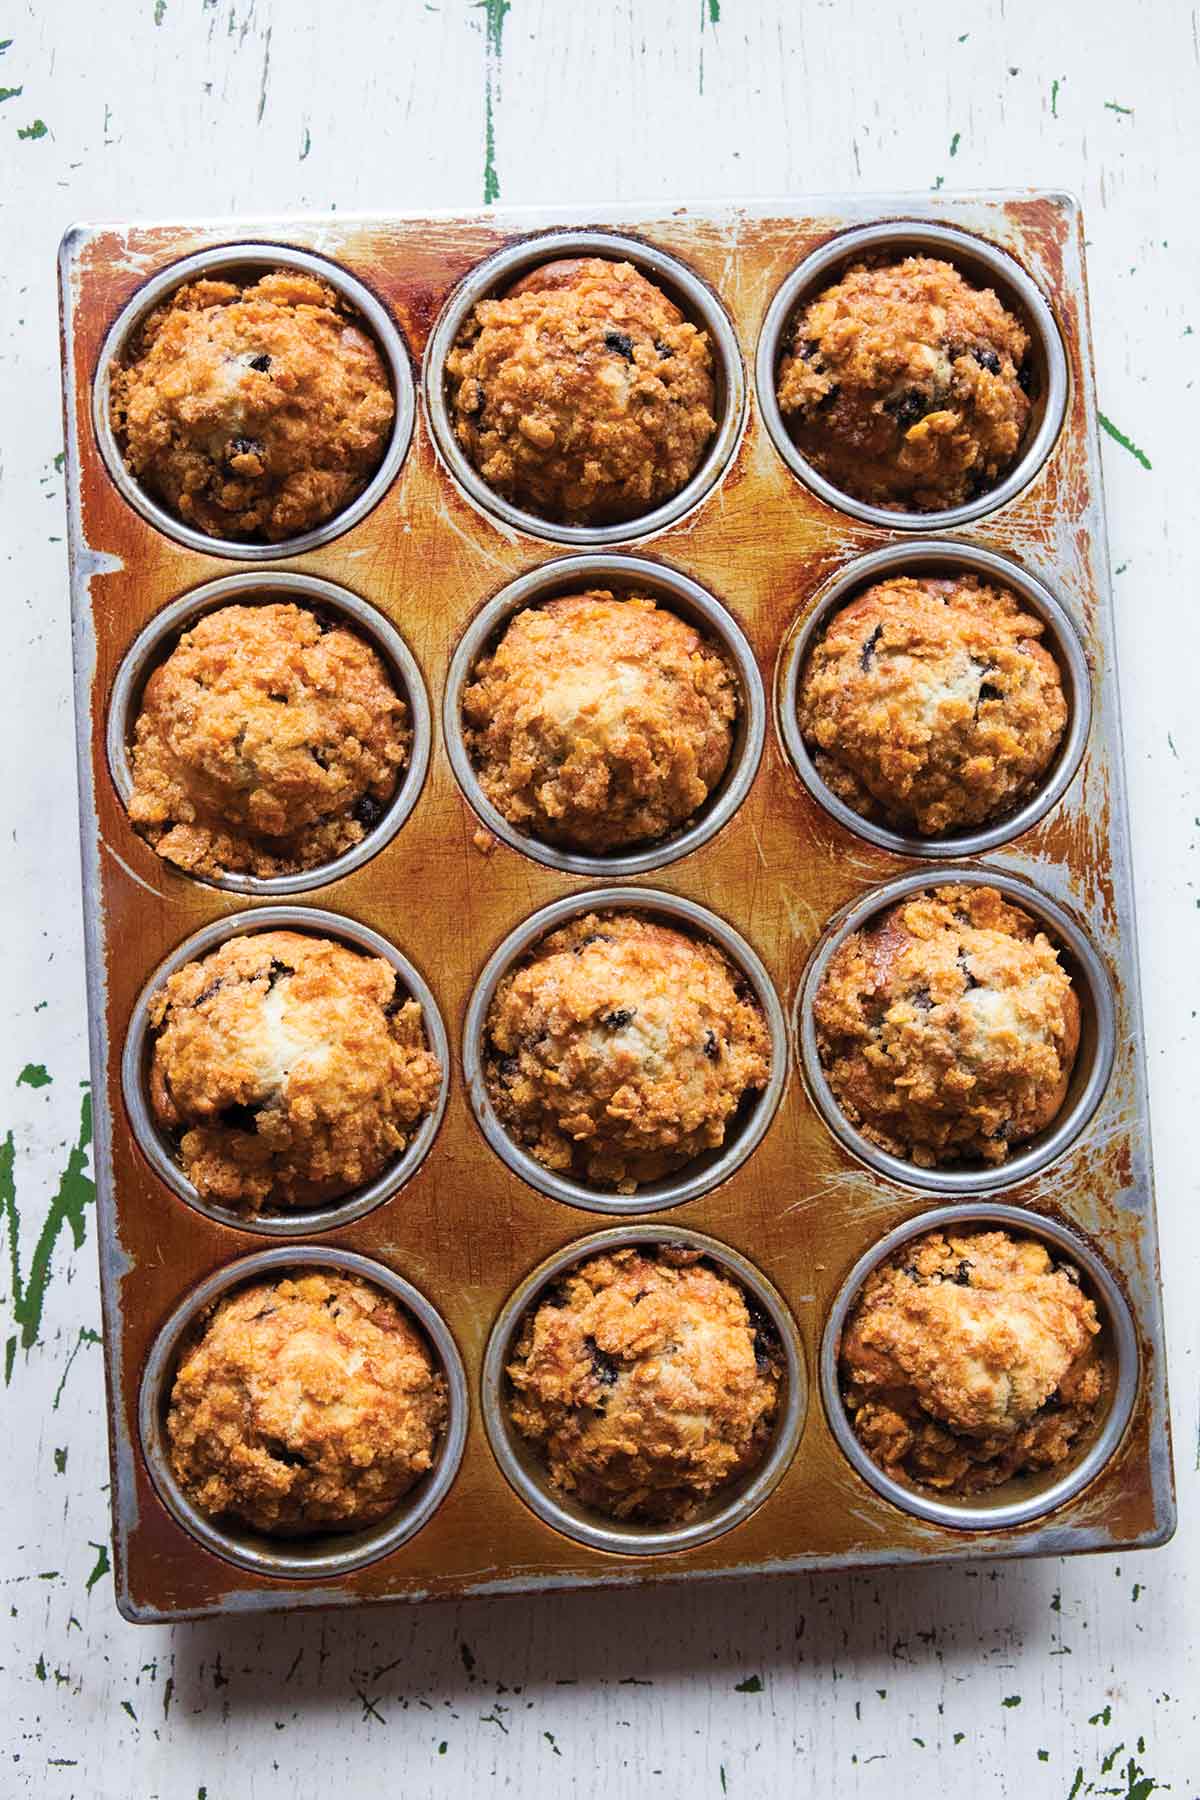 A 12 cup muffin tin filled with blueberry muffins with cornflake topping.